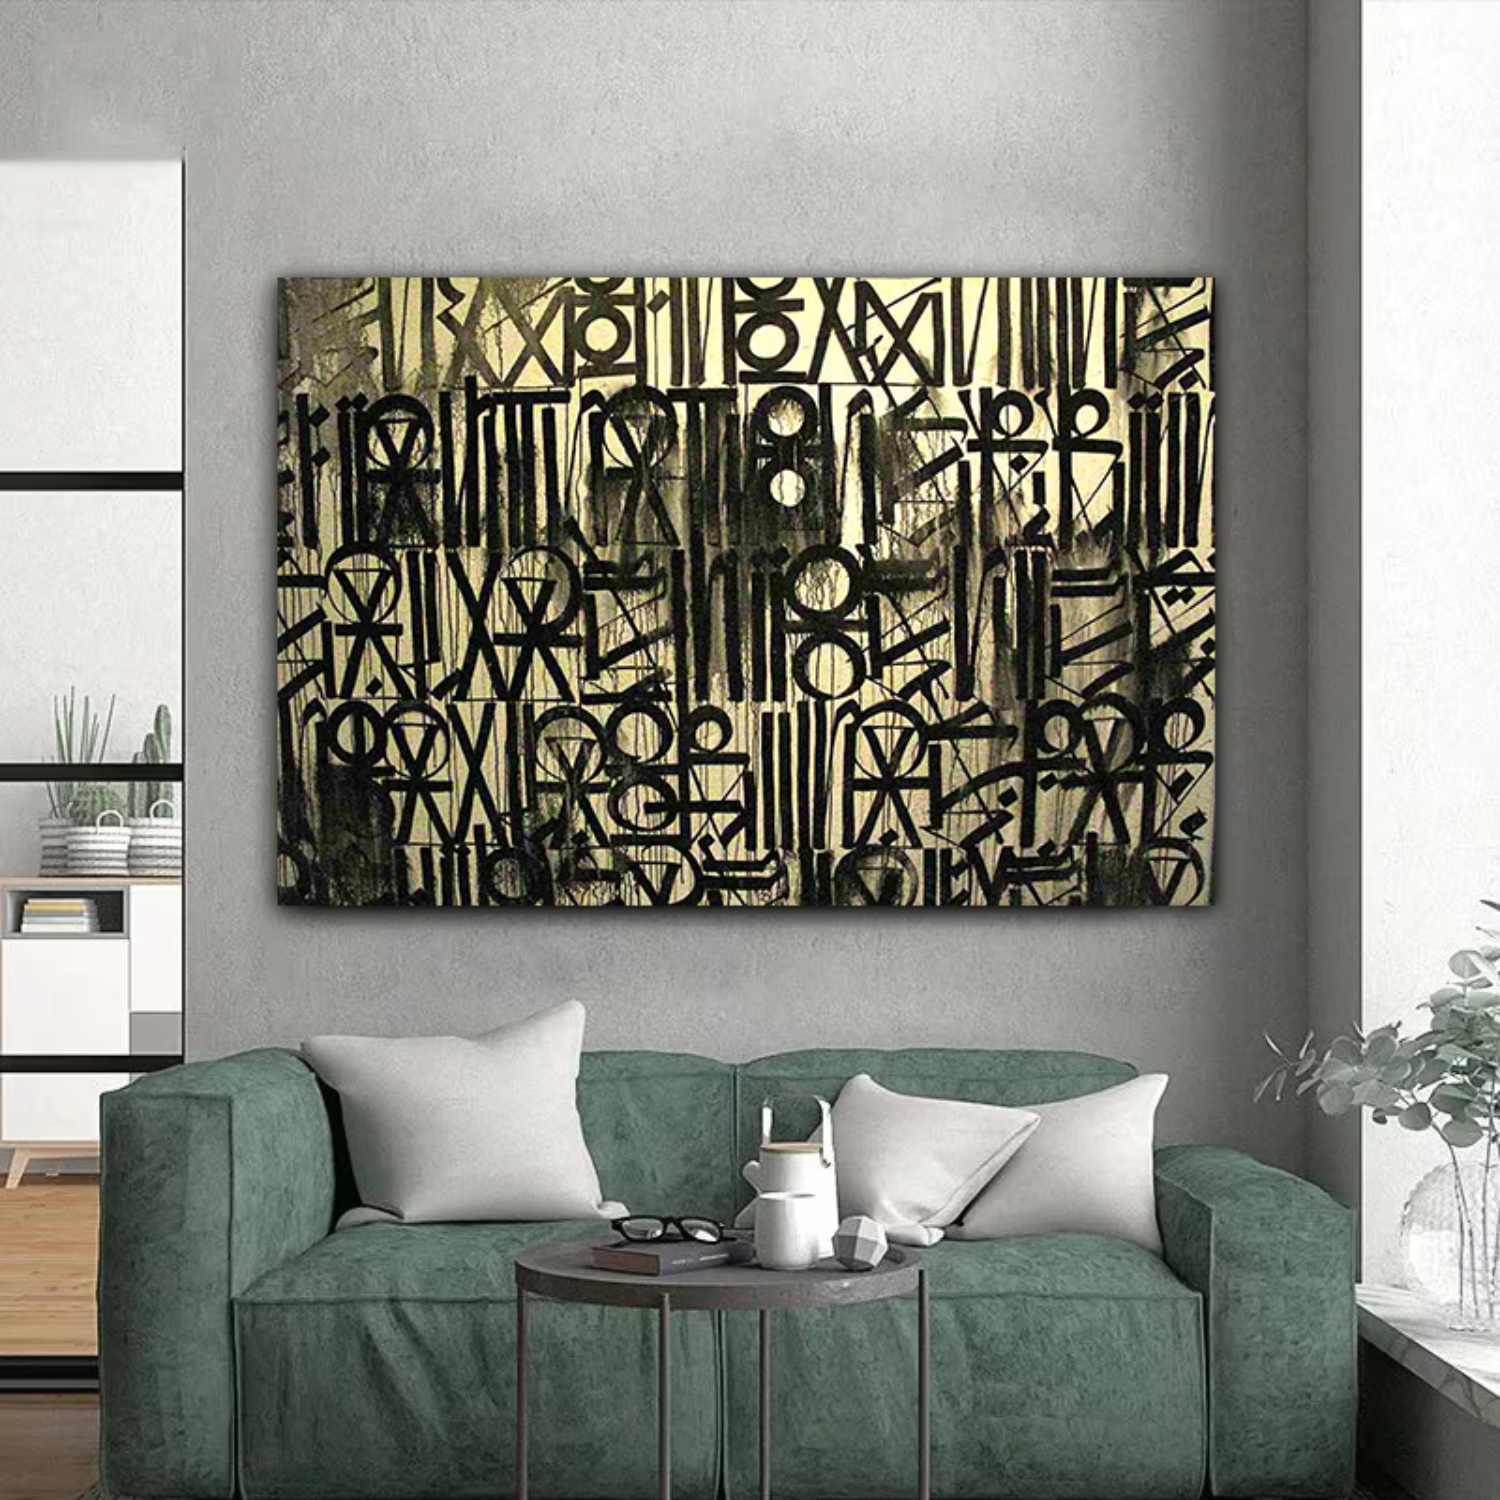 Retna-Inspired Black and Gold Calligraphic Pop Art